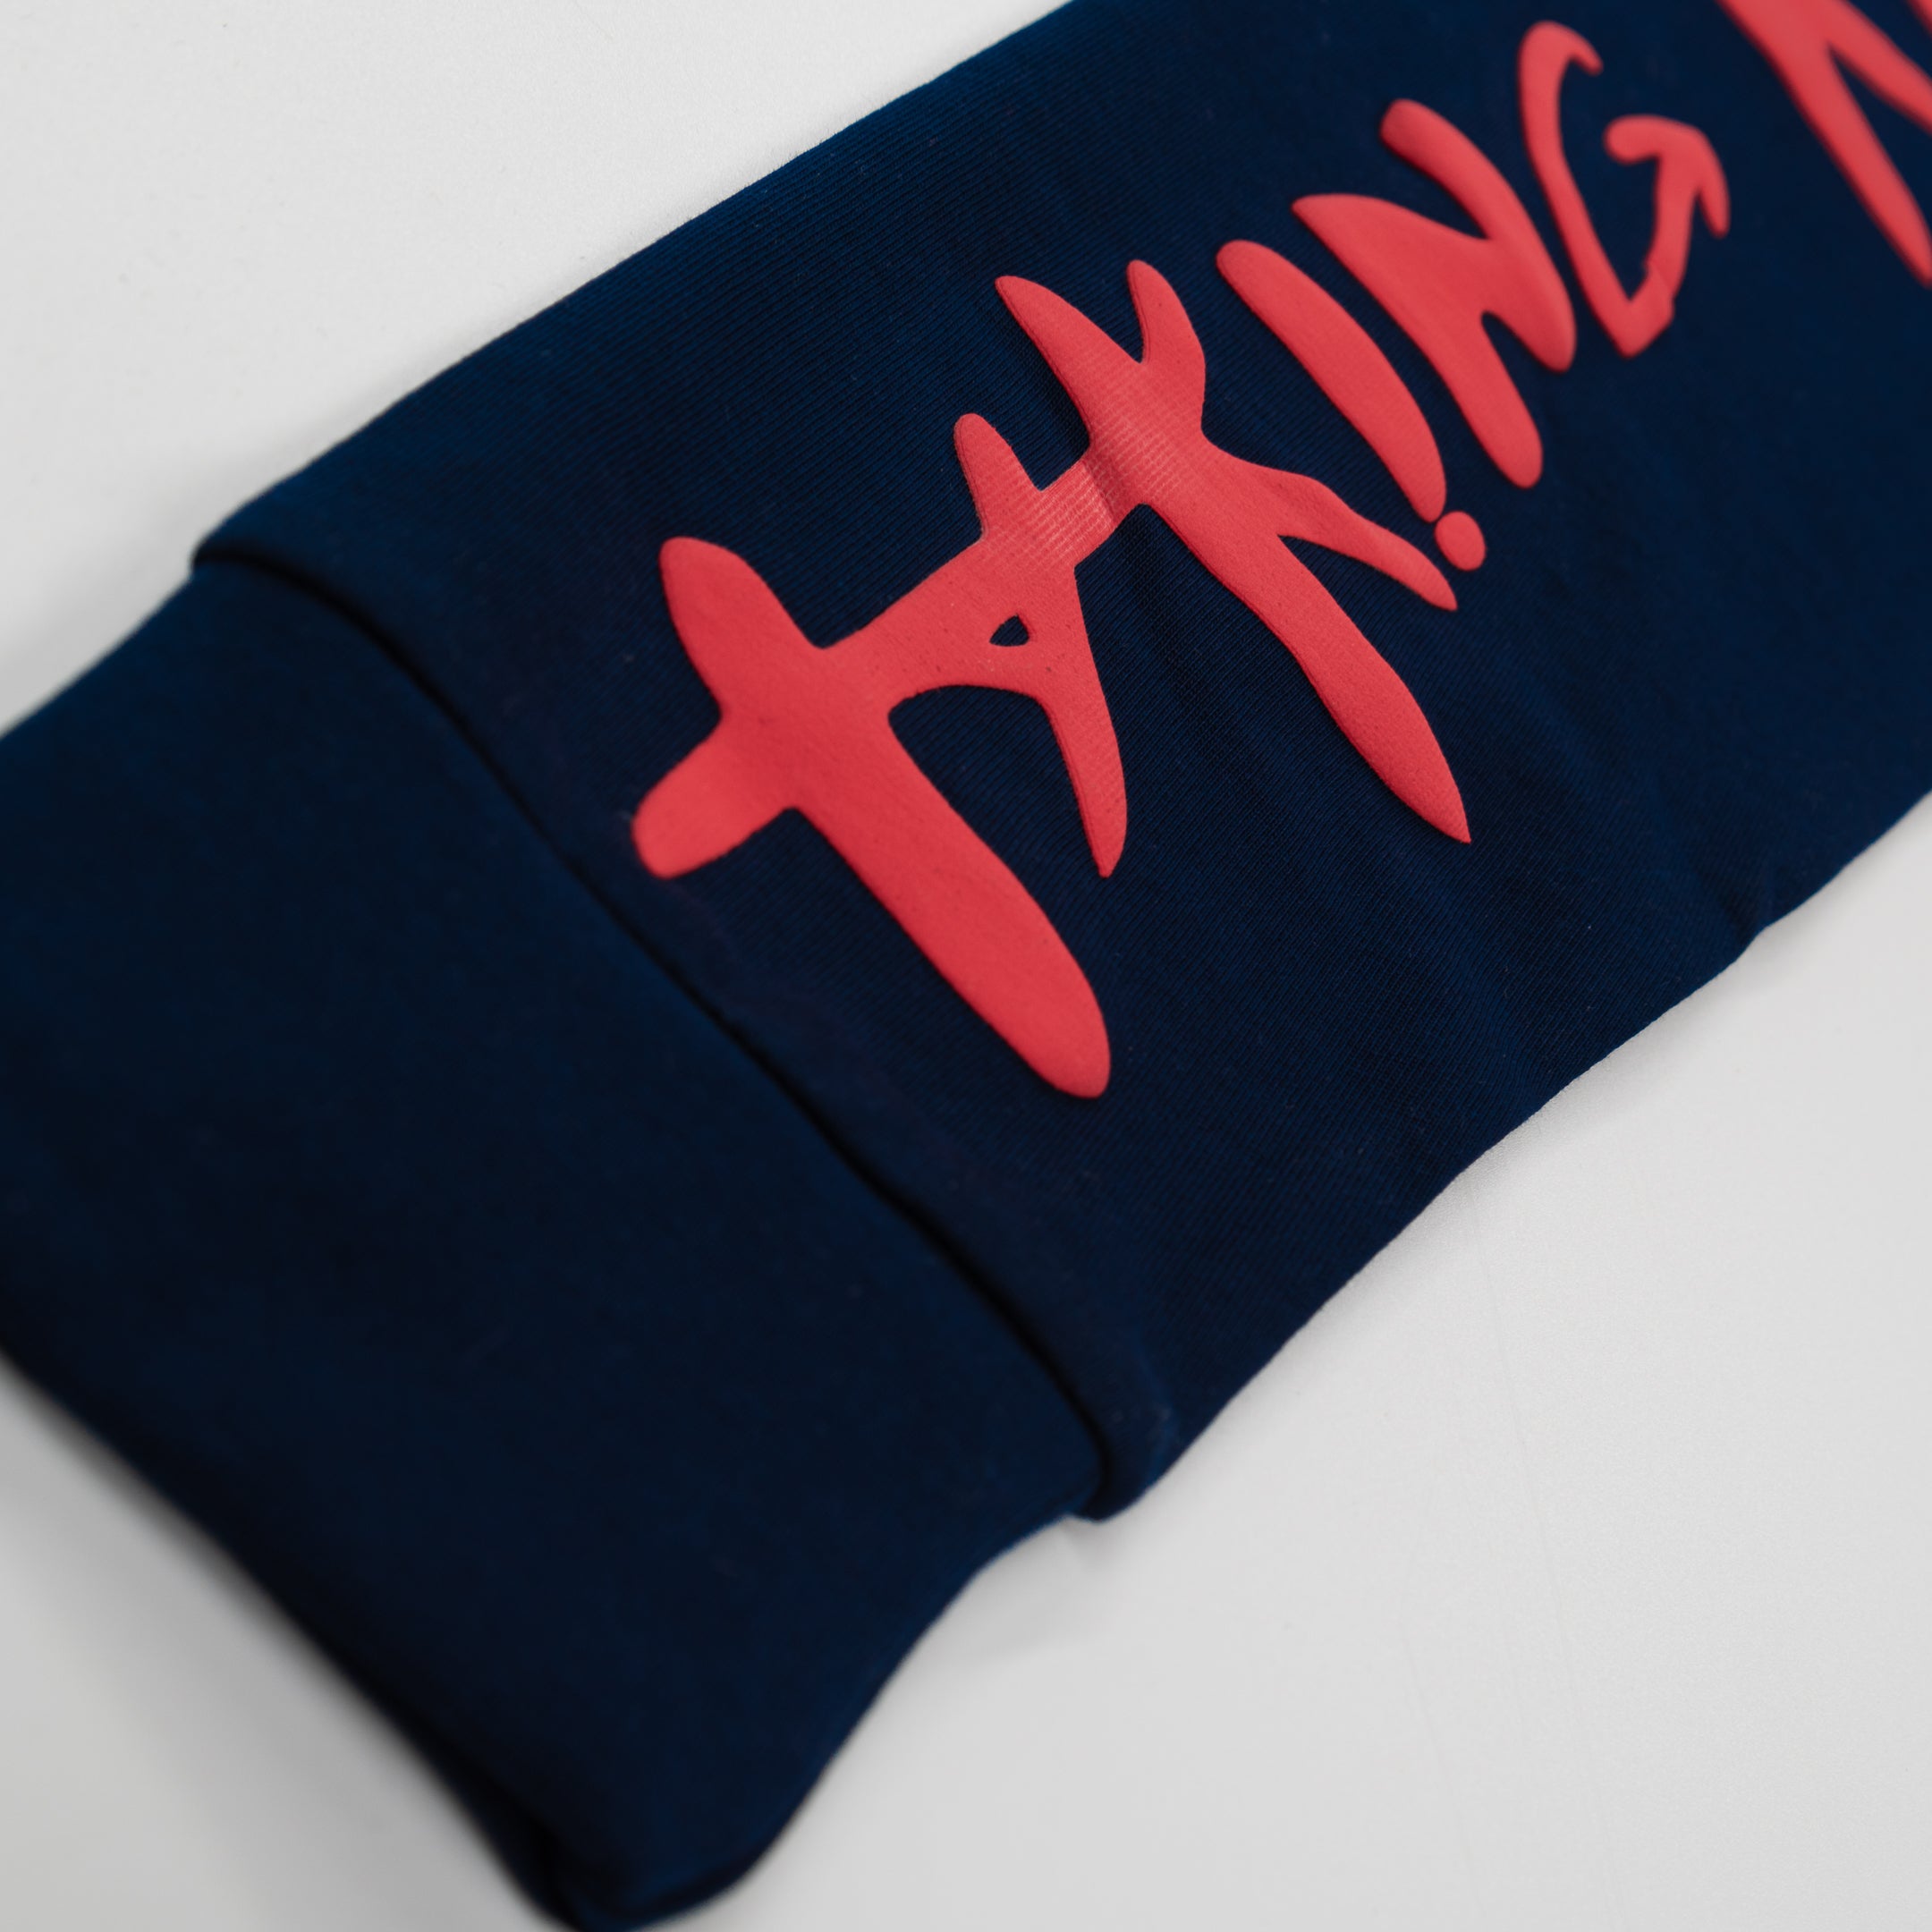 Taking Risks Long Sleeve Navy / Red / Clay